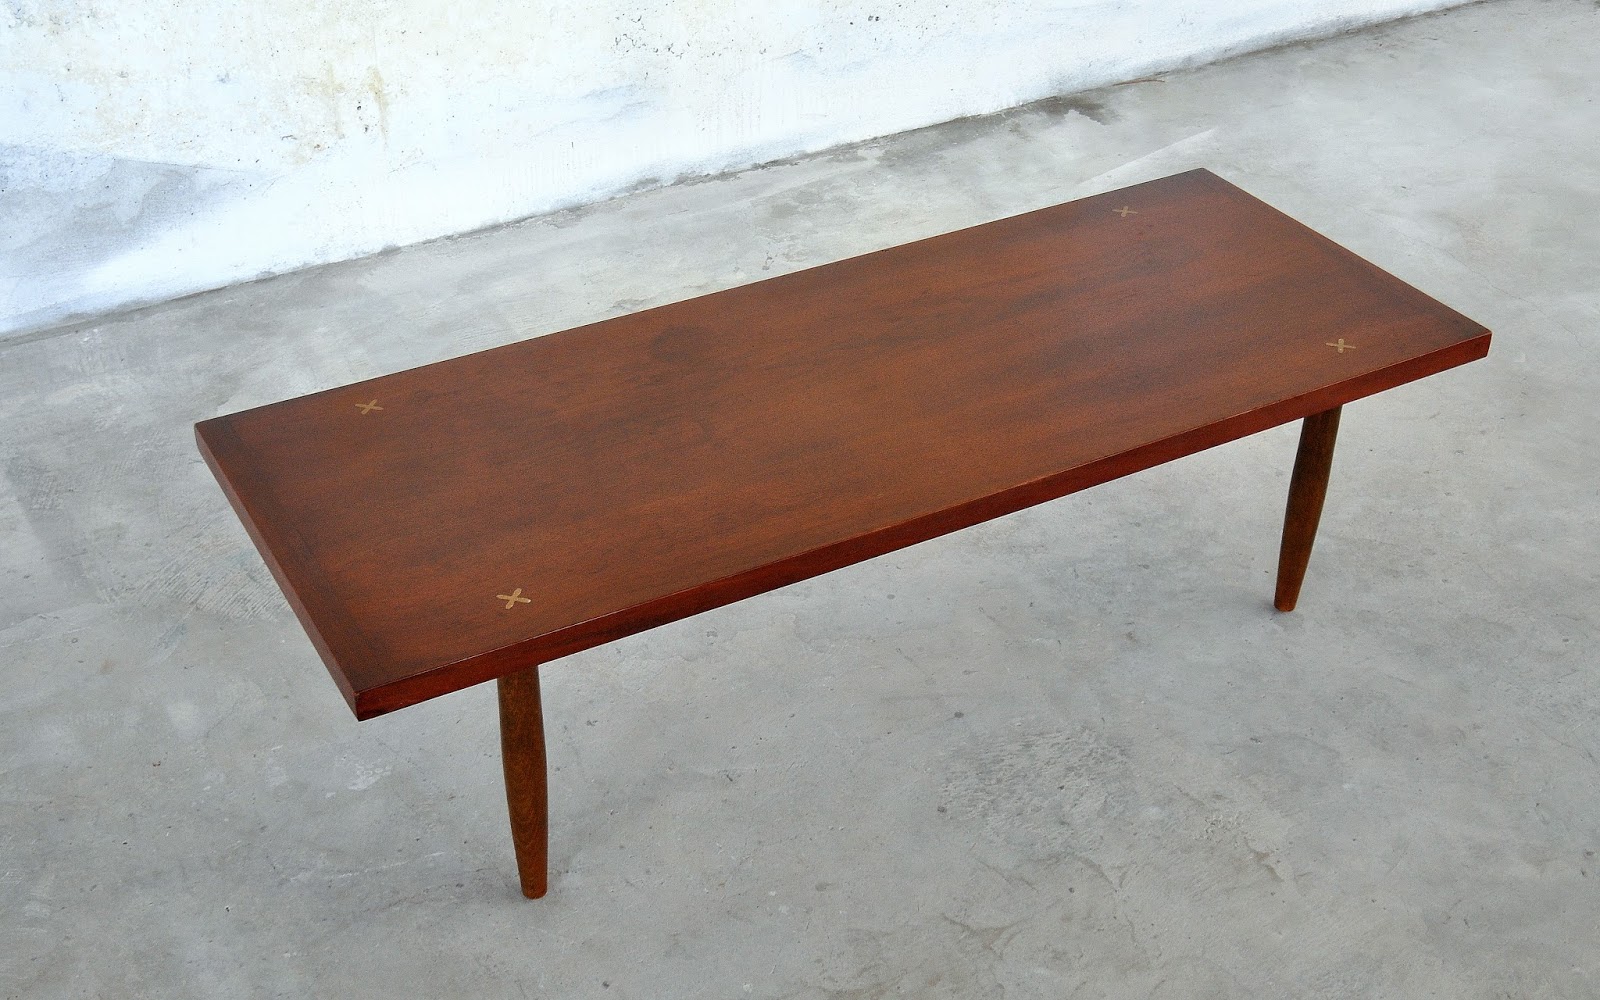 SELECT MODERN: Mid Century Modern Walnut Coffee Table or Bench